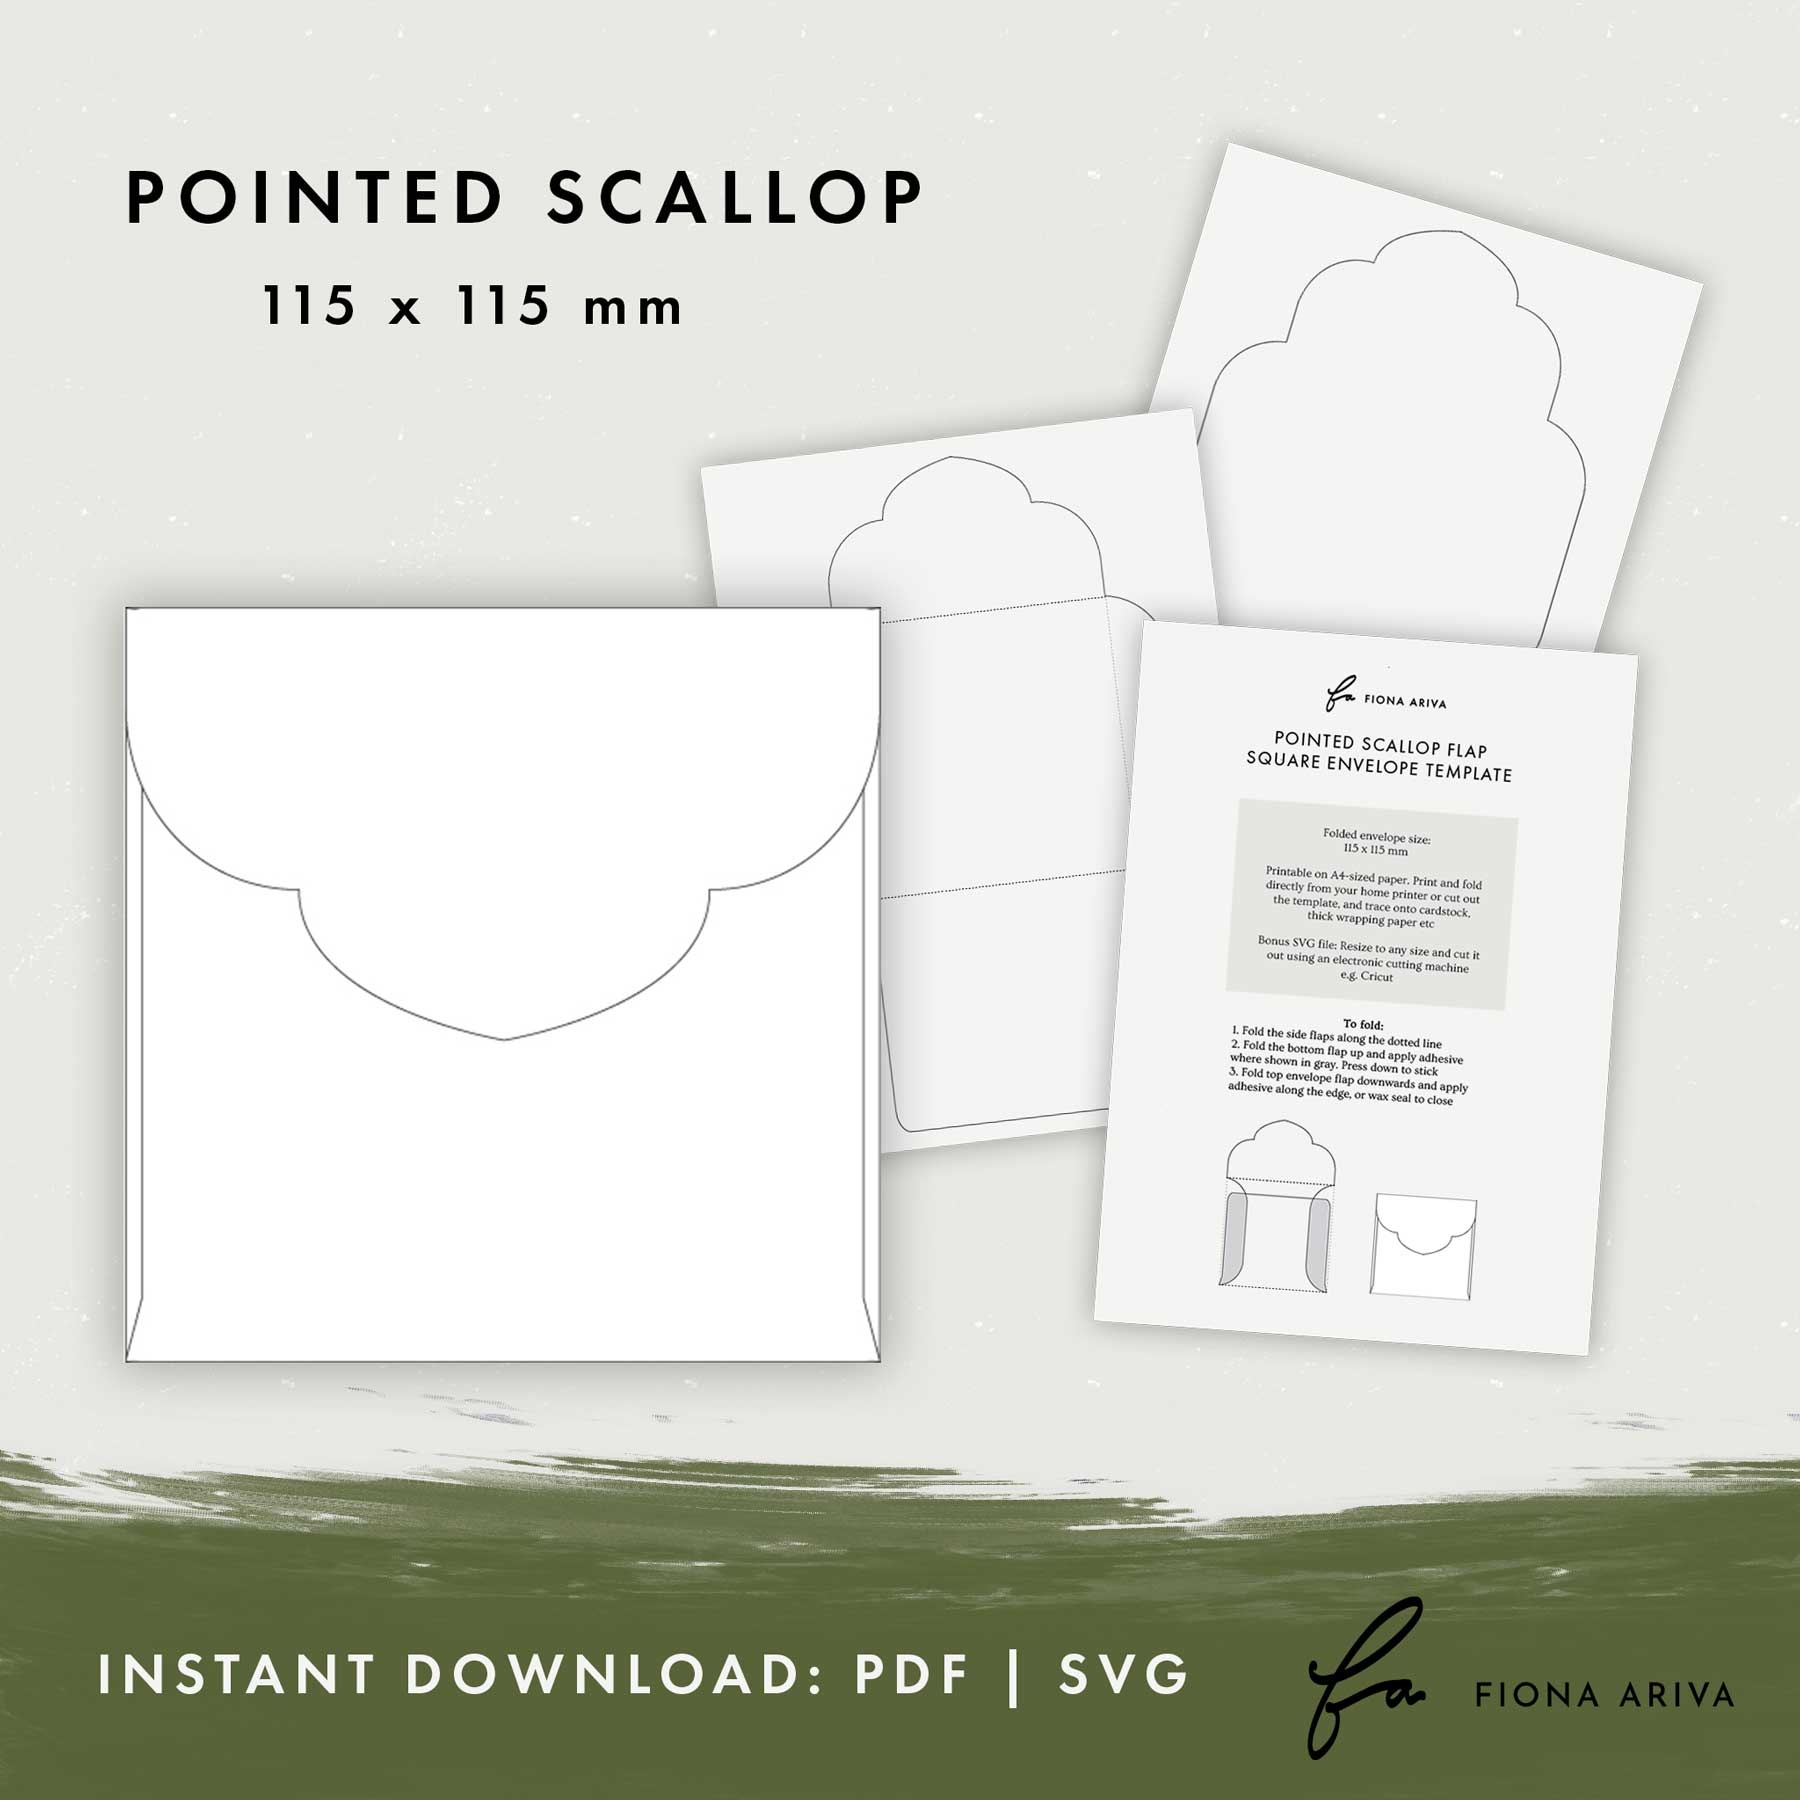 Pointed Scallop Flap Square Envelope Template 115 x 115mm